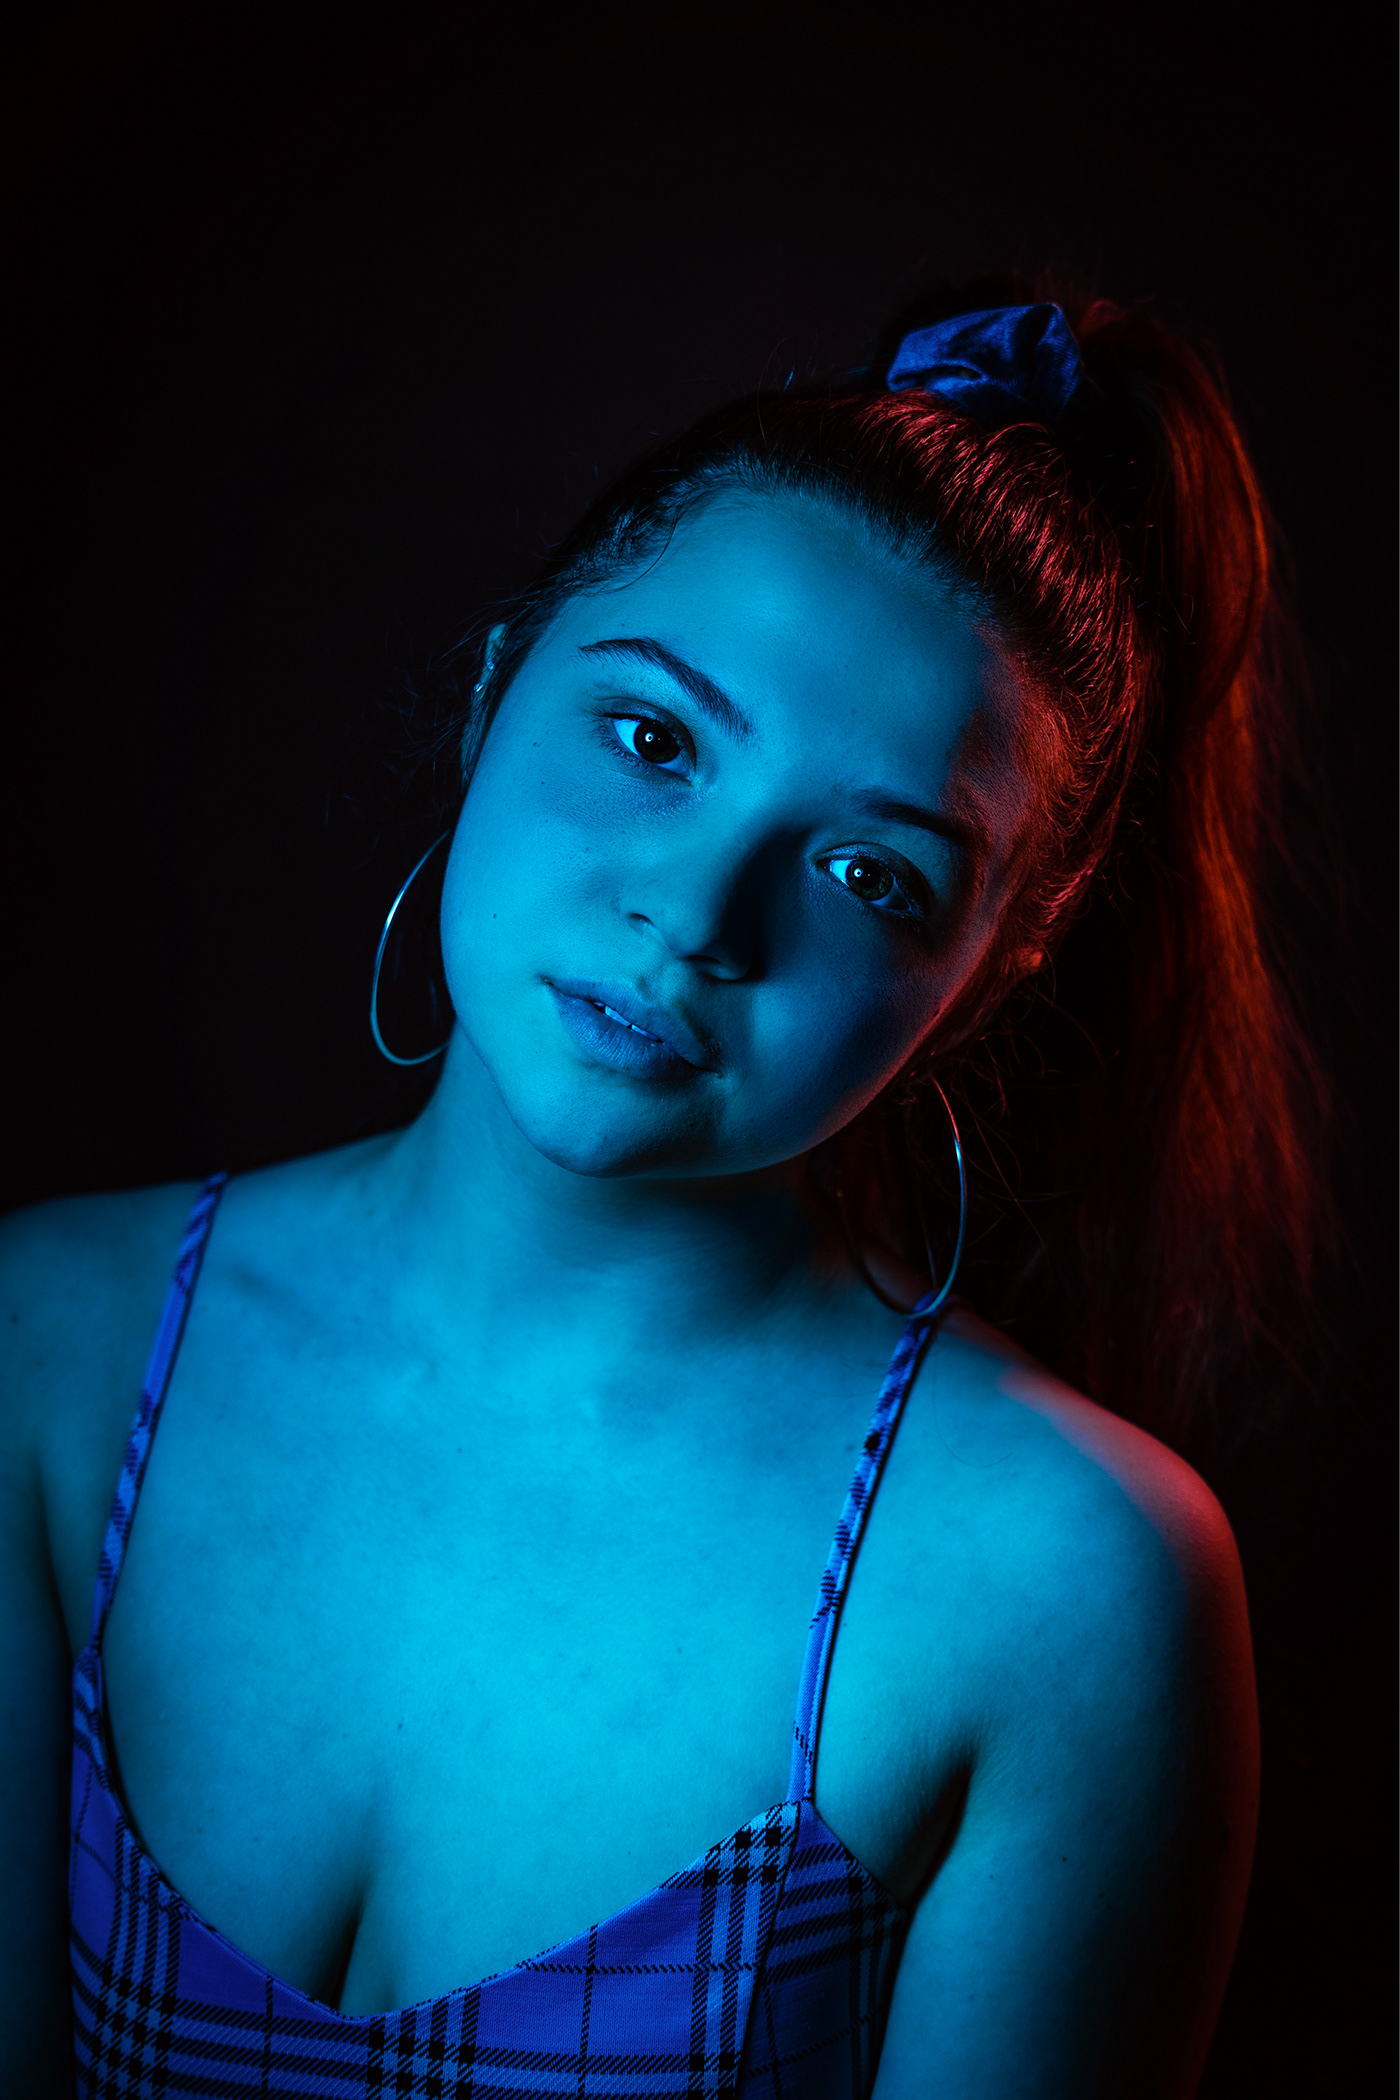 blue bts Canon color demian EOS R6 gels godox Hot lighting model Moody new photoshoot portrait red tejeda